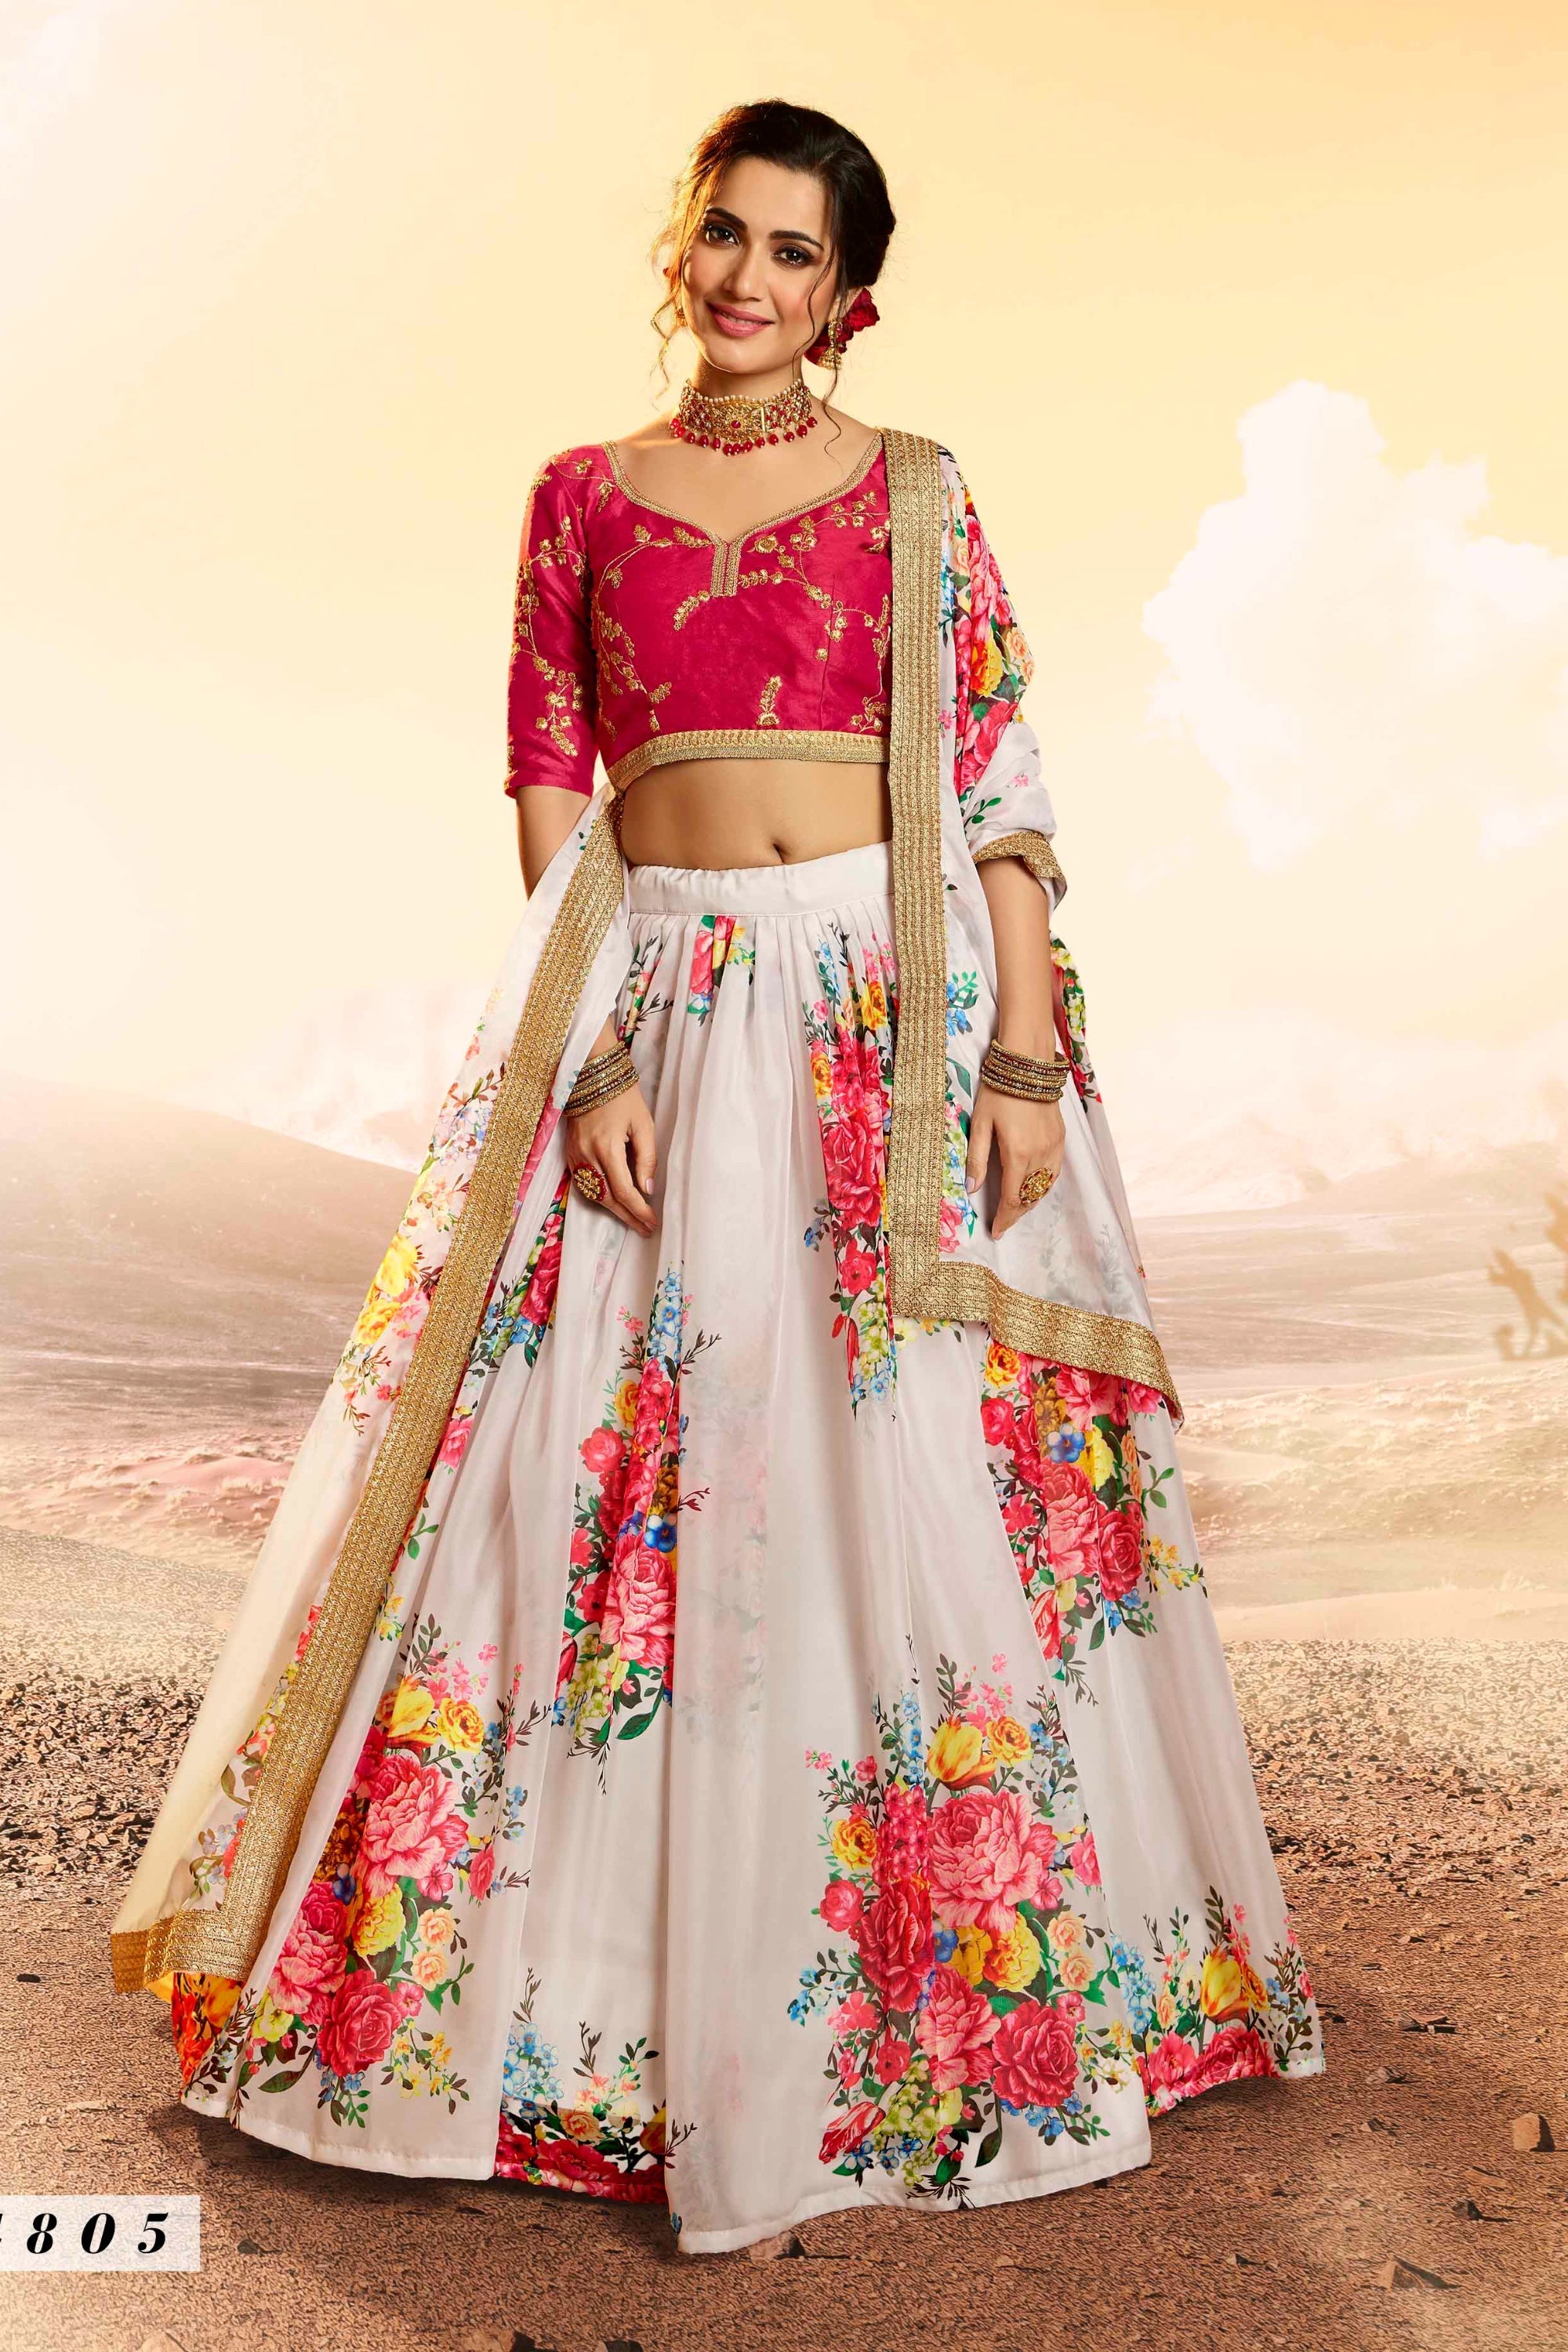 Buy latest bridal lehenga online from inddus in India | Clasf fashion